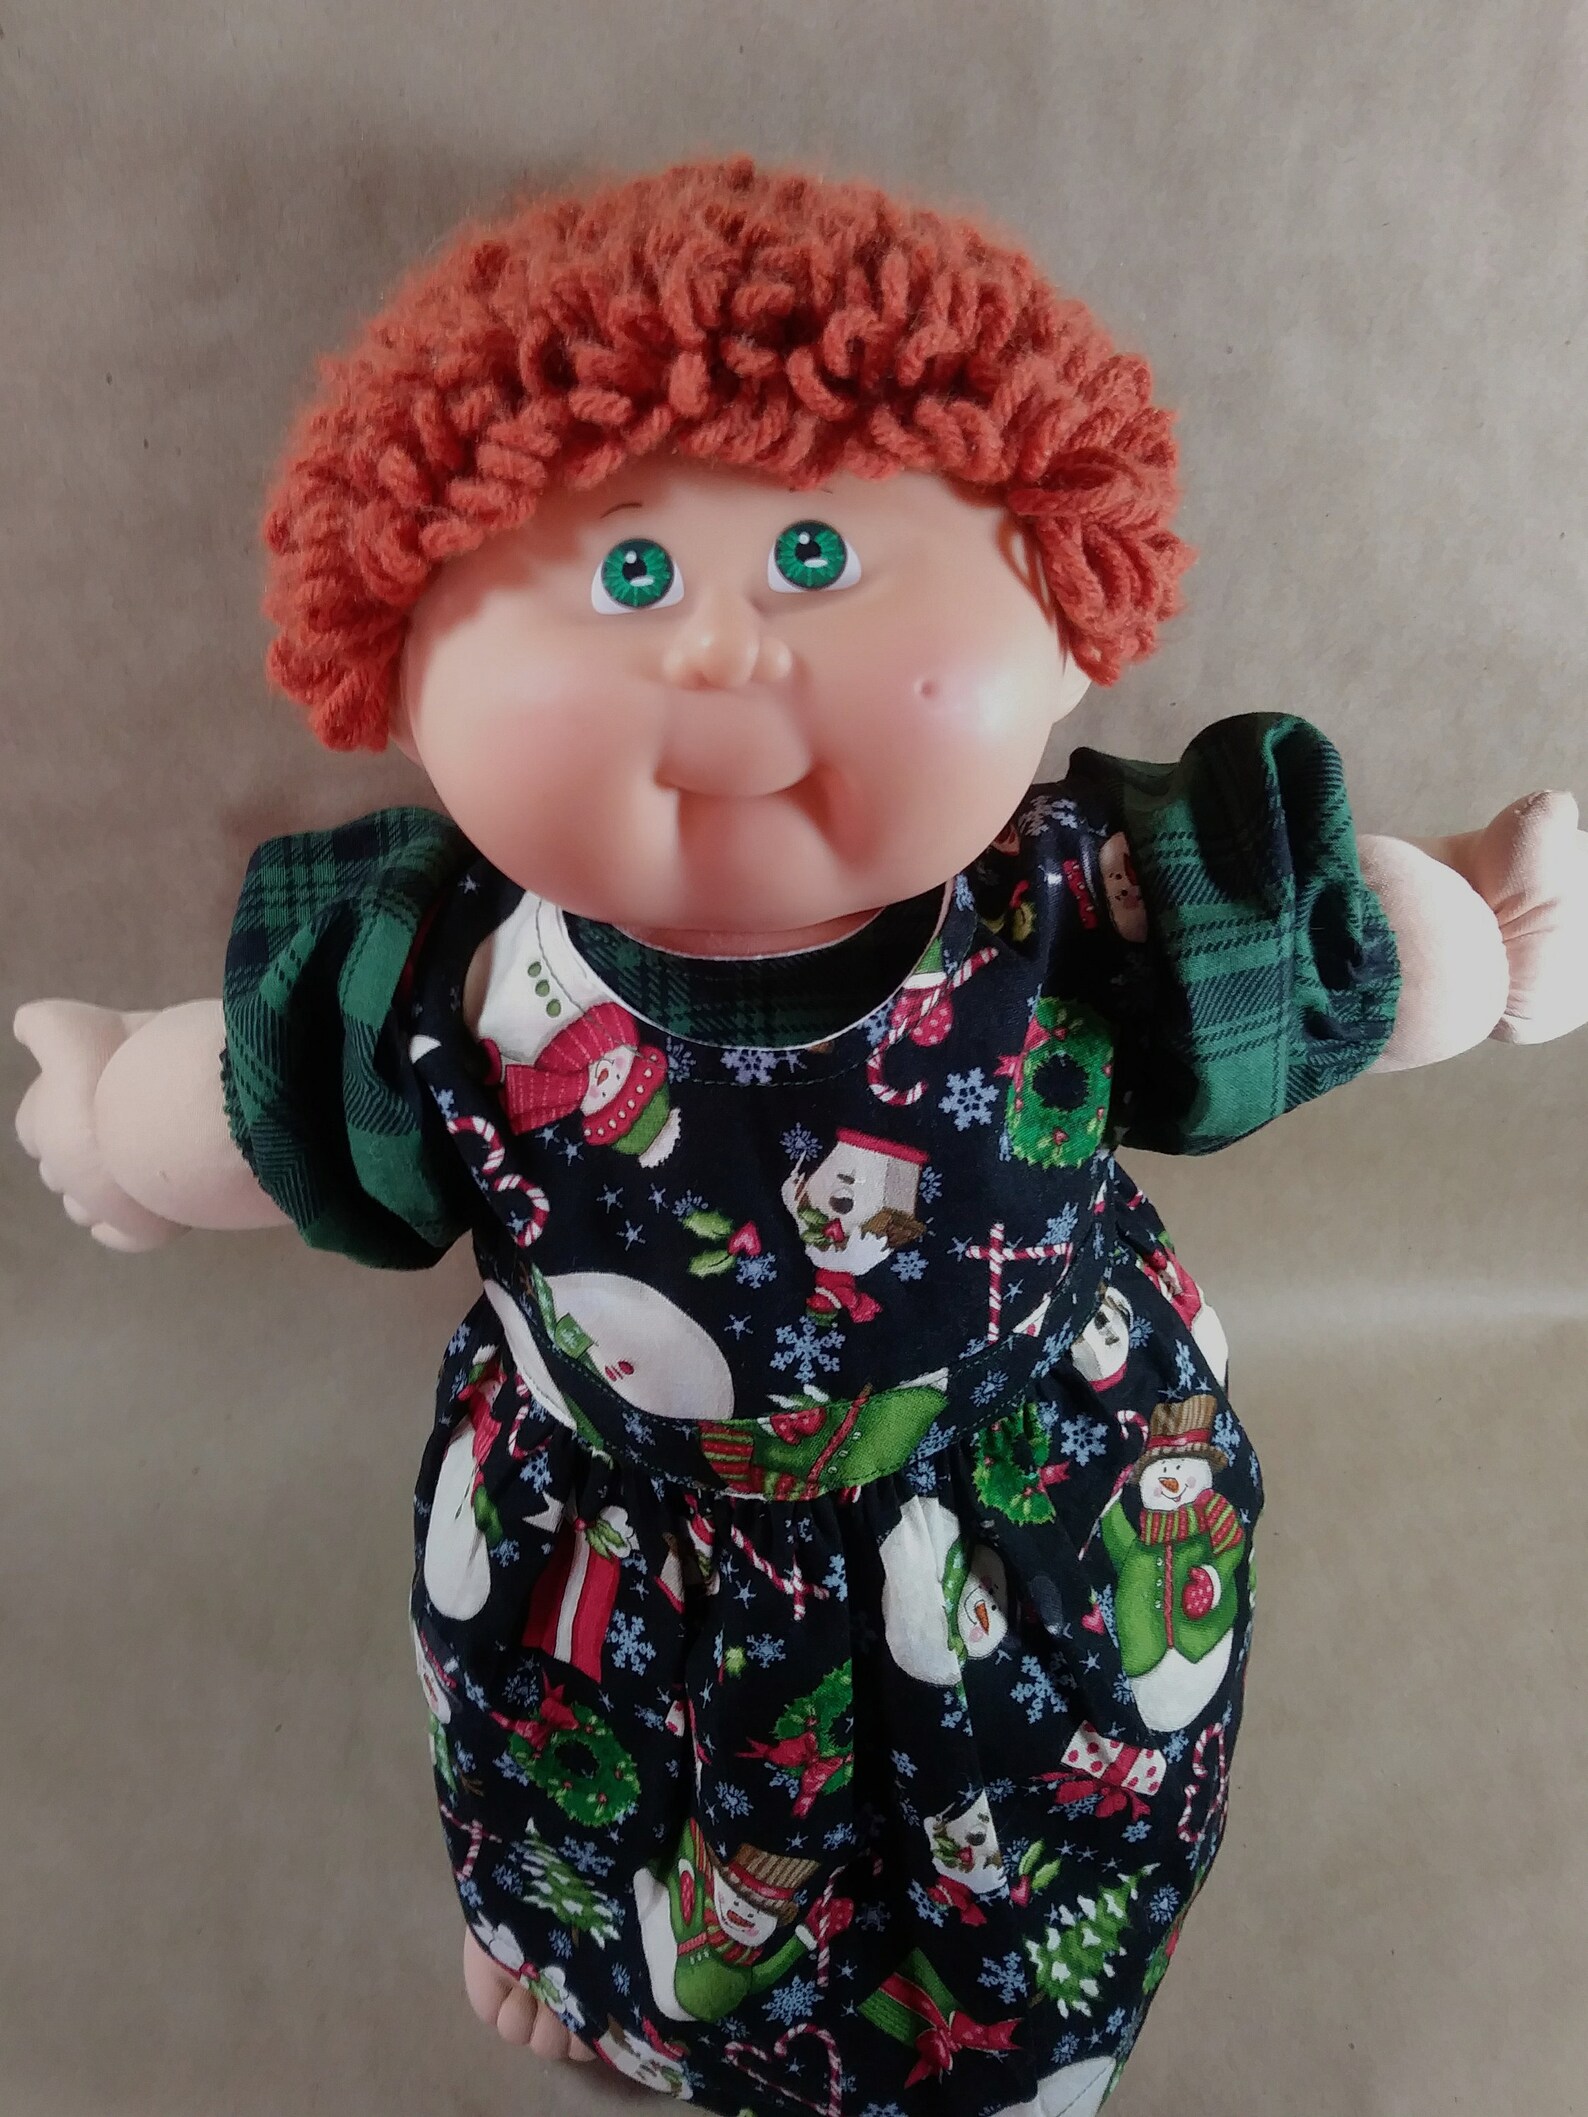 Green Holiday dress for 18 inch Cabbage Patch Doll | Etsy